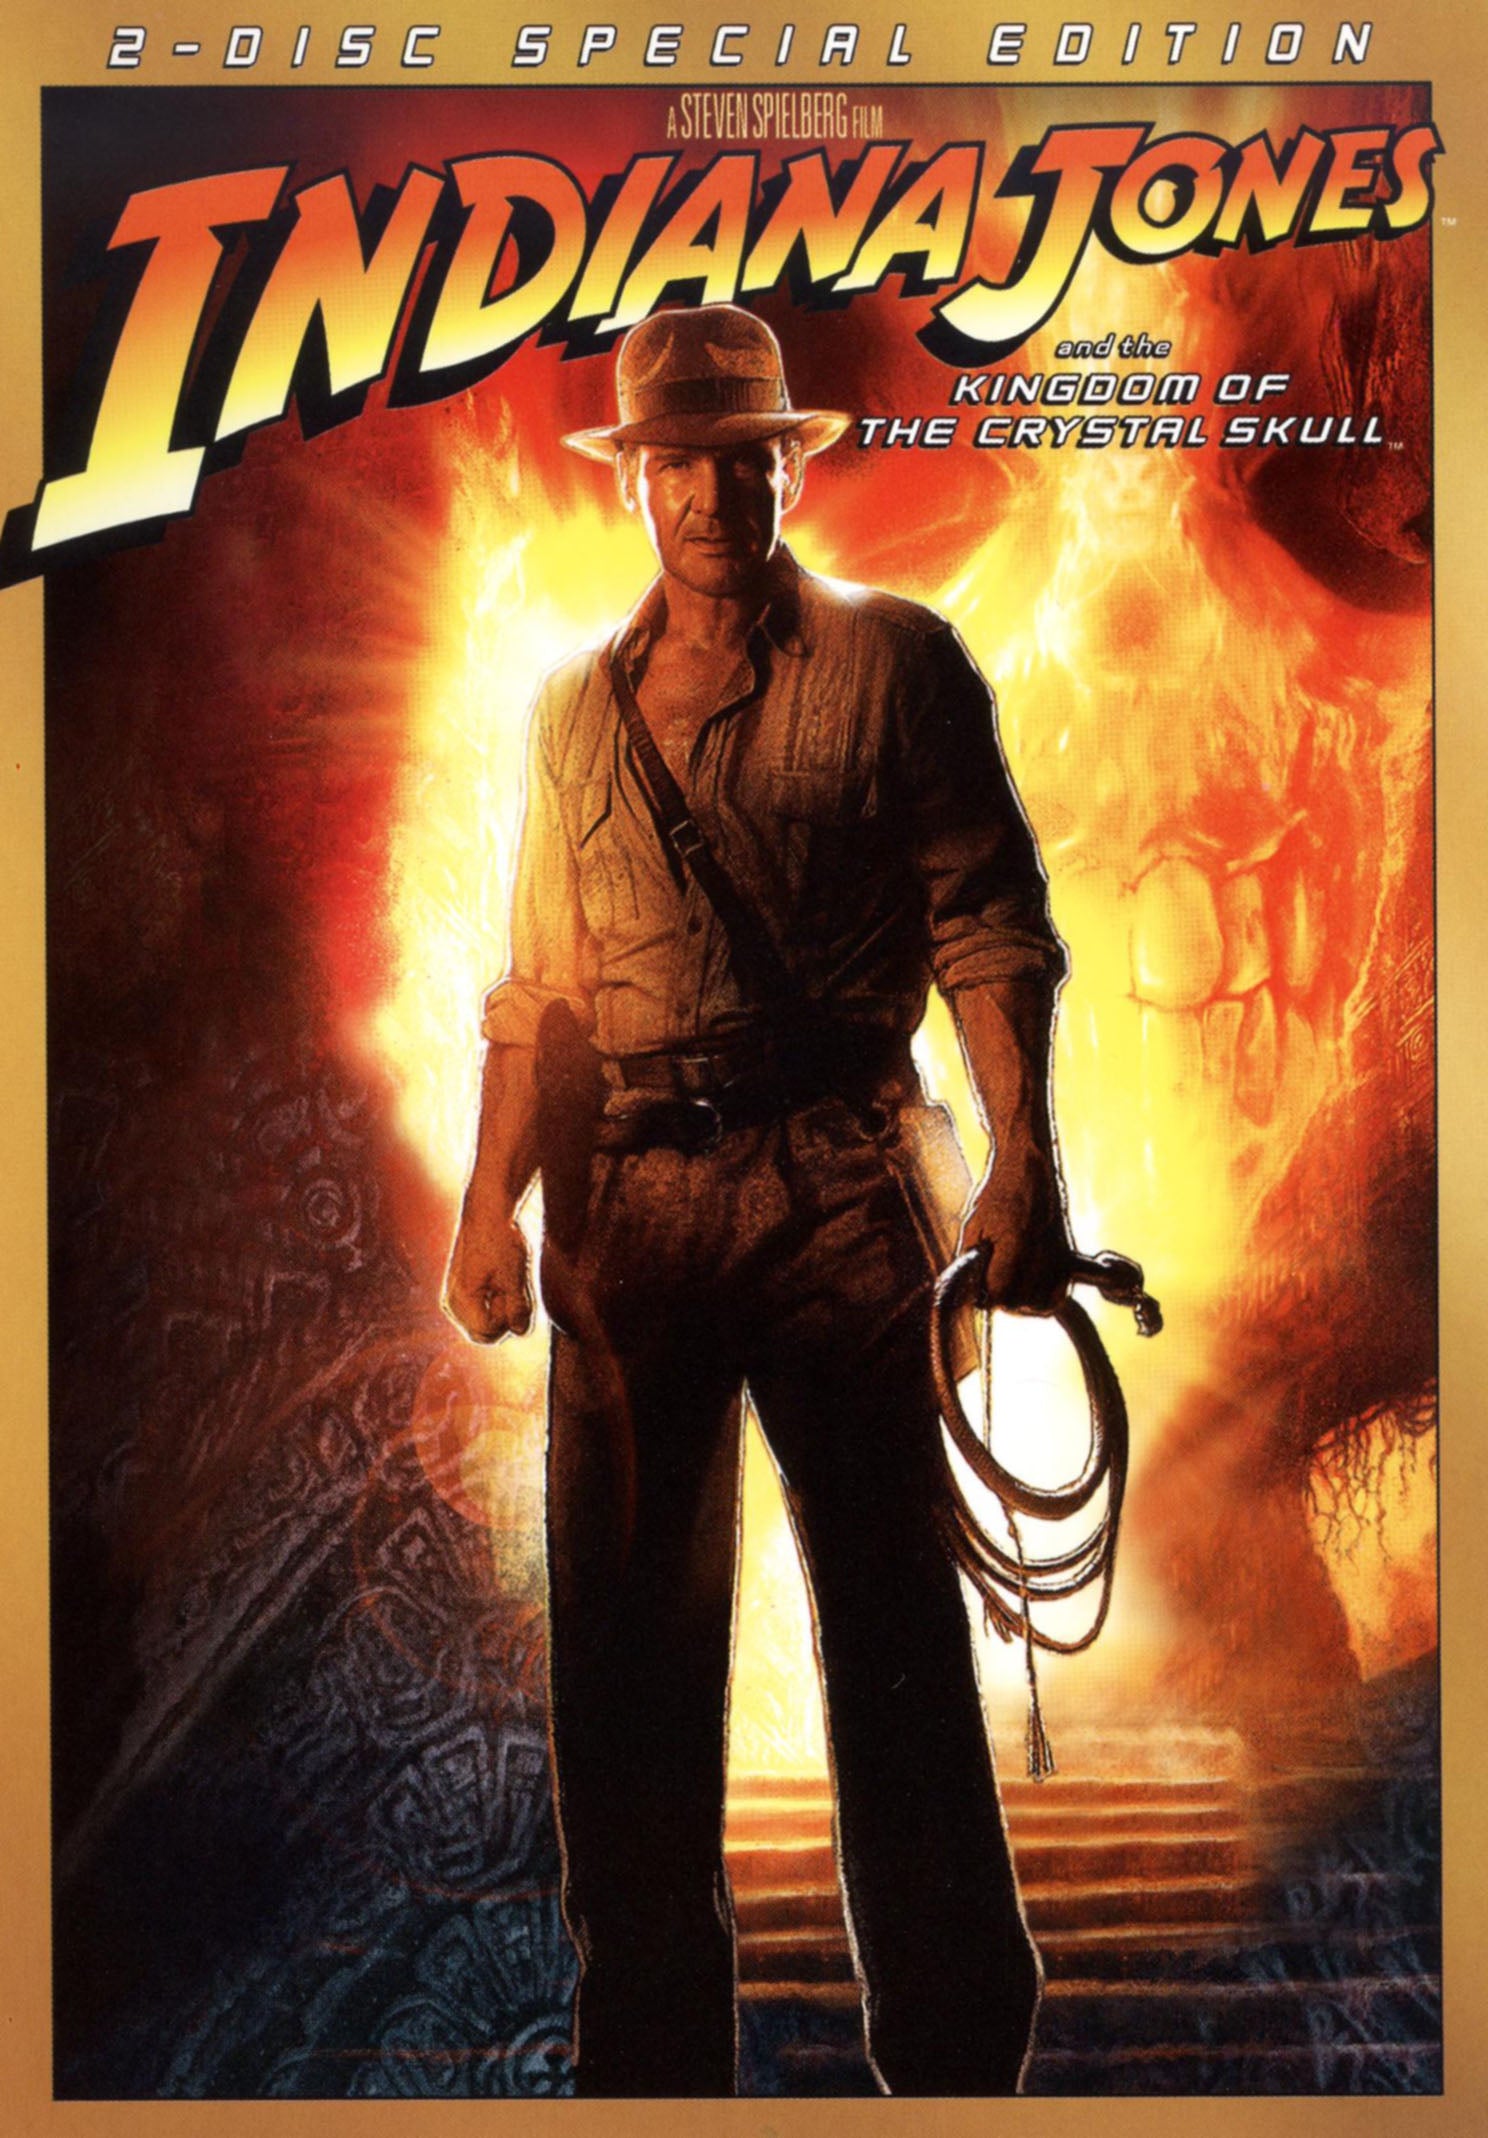 Indiana Jones and the Kingdom of the Crystal Skull [WS] [2 Discs] [Special Edition] cover art